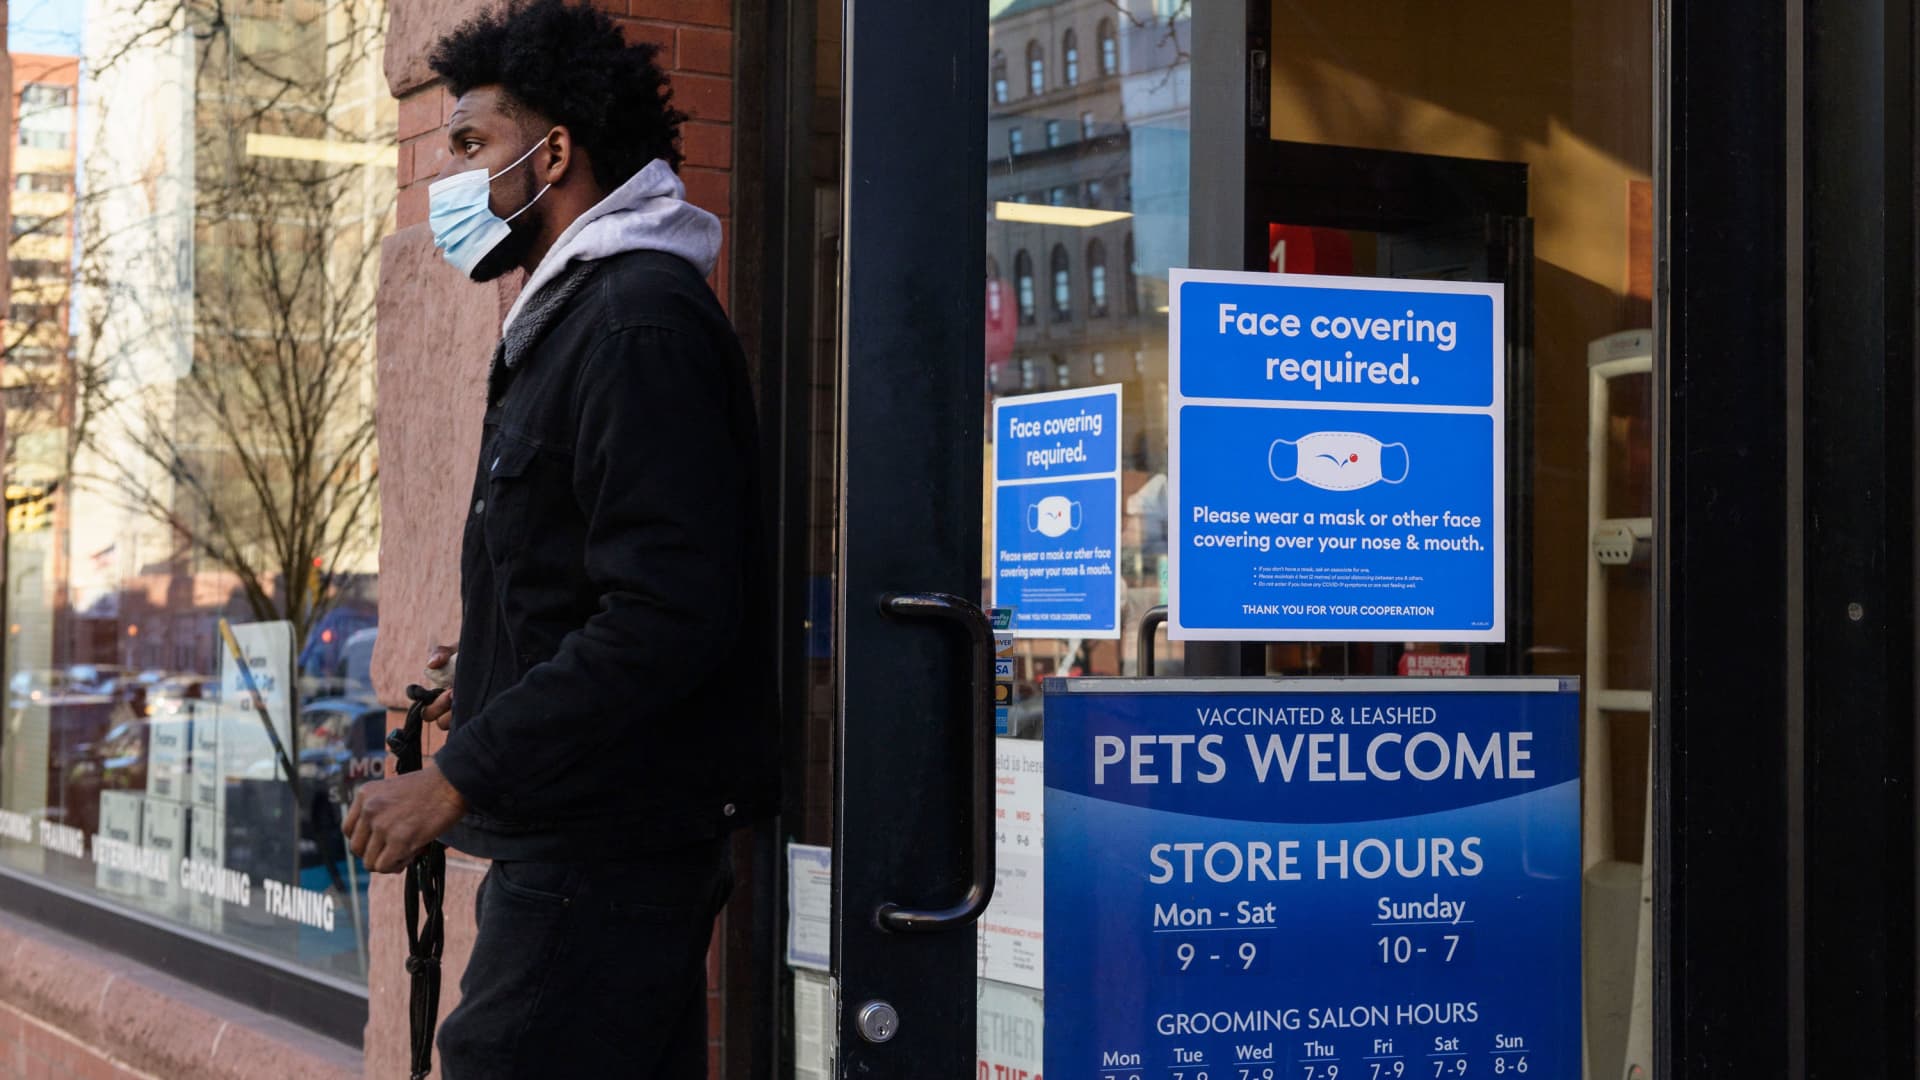 A person wearing a face mask leaves a store on January 26, 2022 in New York City.